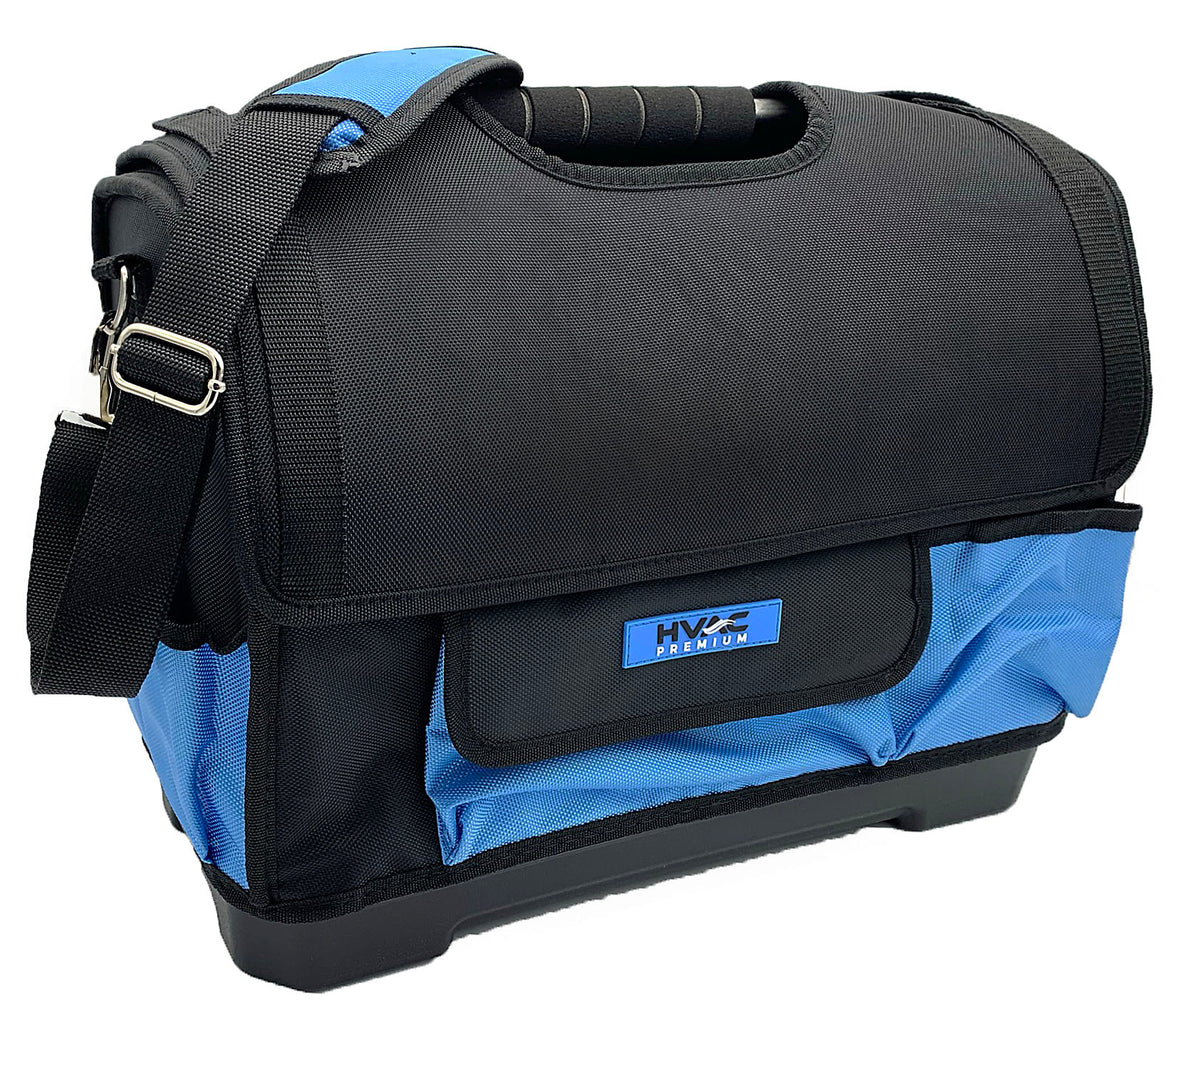 Sturdy tool bag with cover